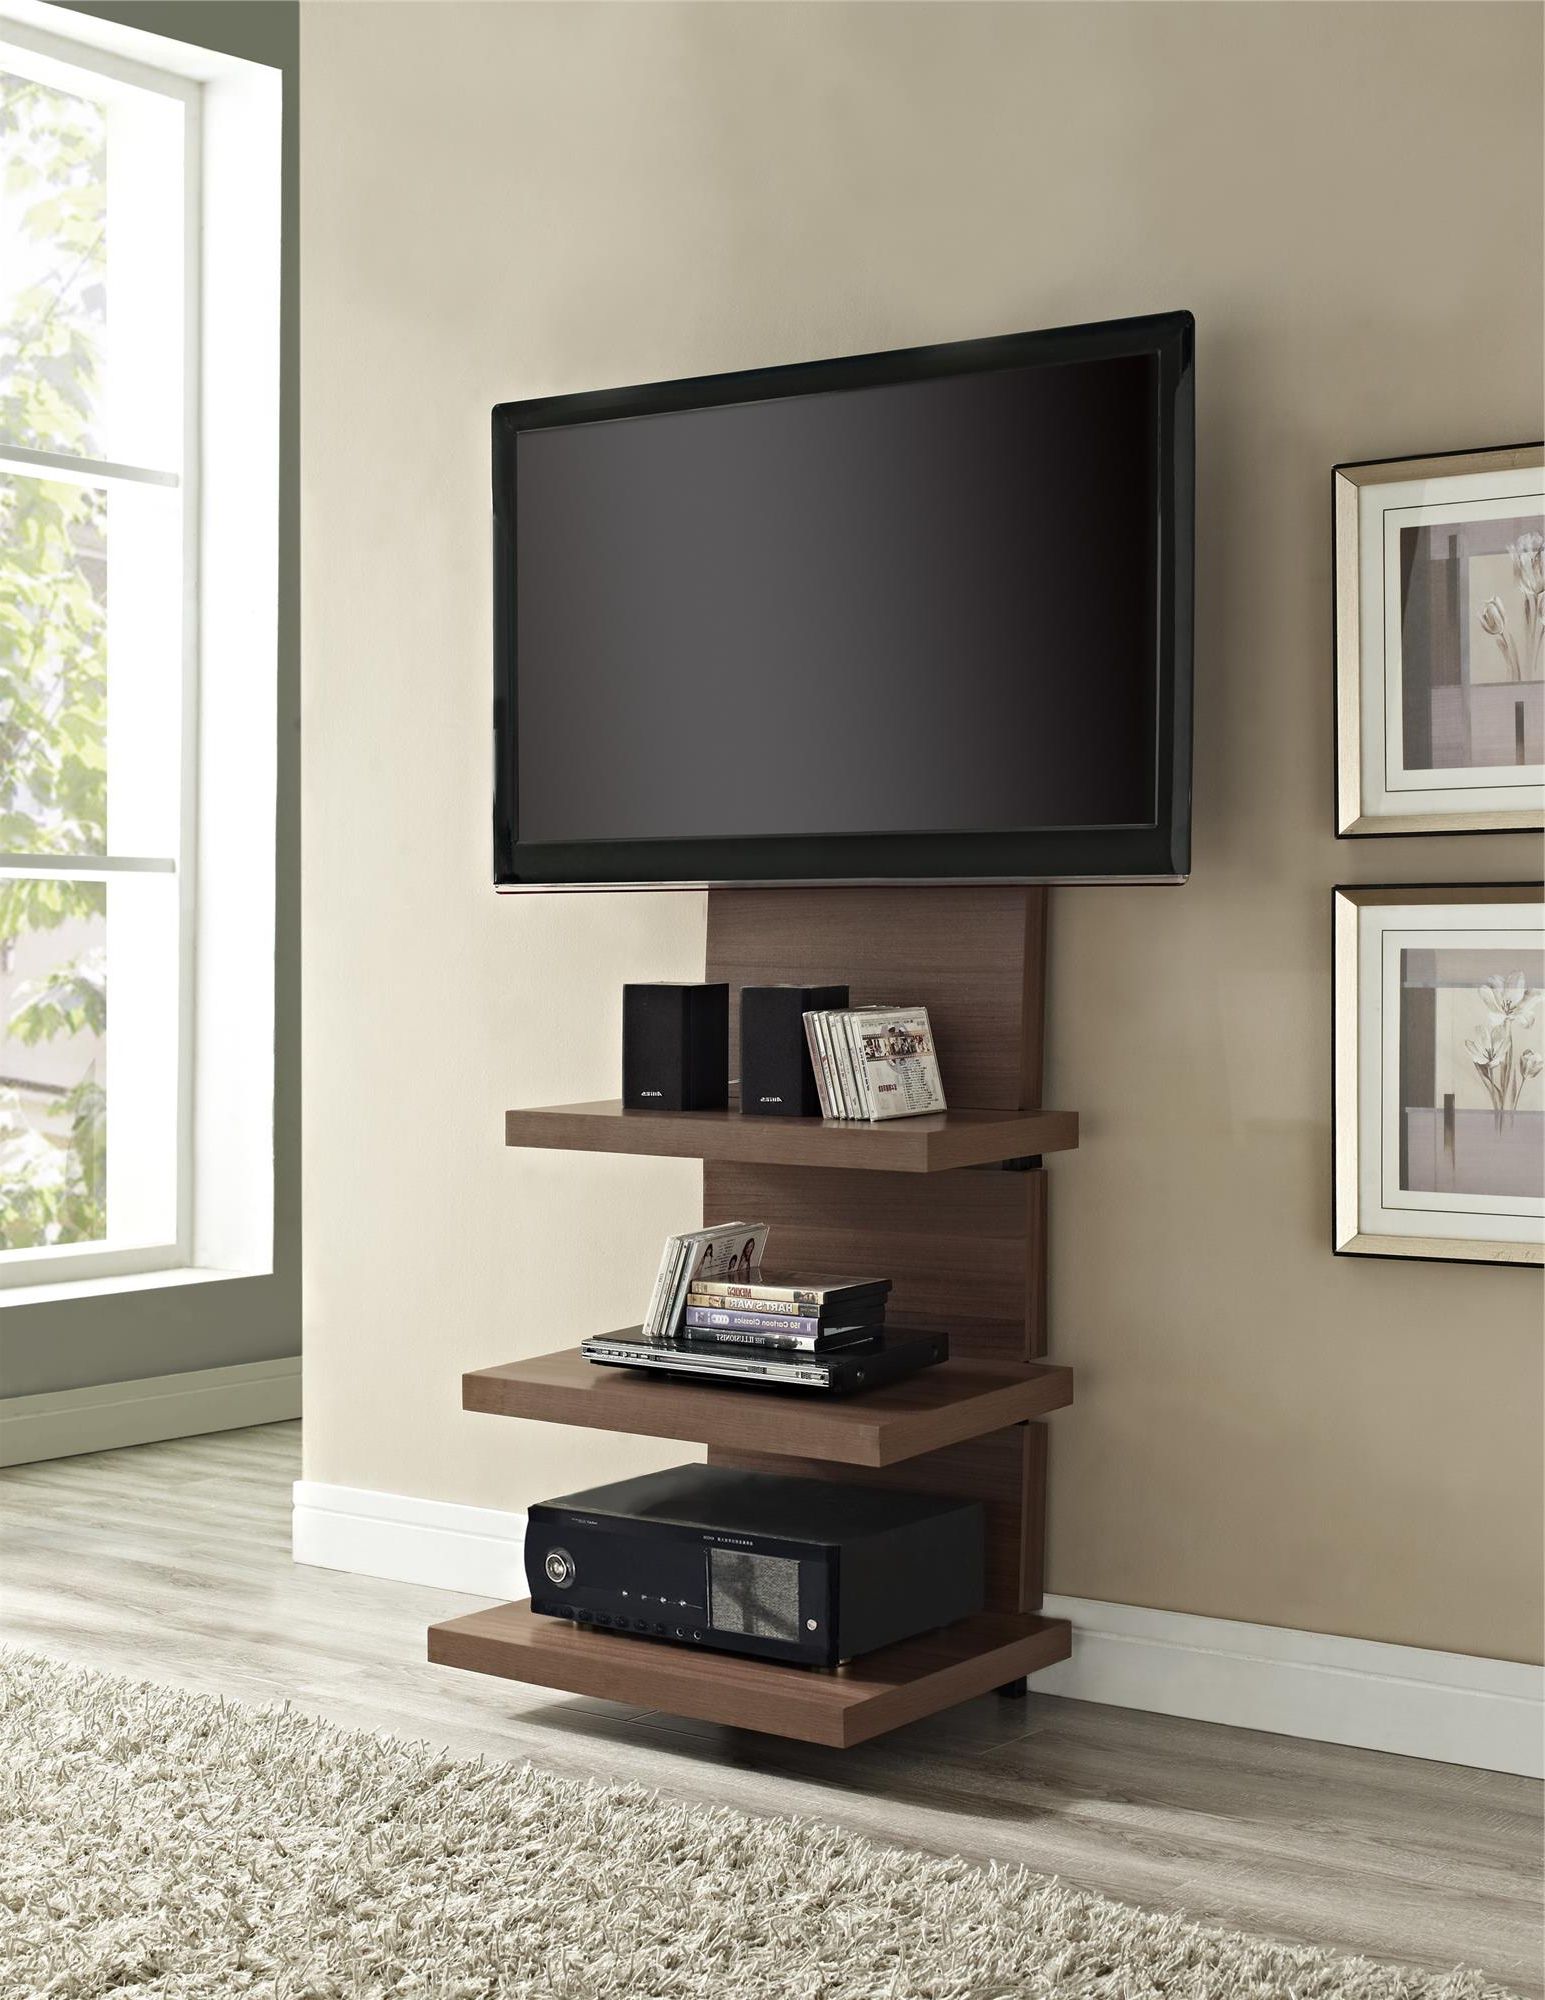 Big Tv Stands Furniture With Regard To Best And Newest Big Tv Stand Wood Stands Recommendation Homesfeed Wooden Brown On (View 9 of 20)